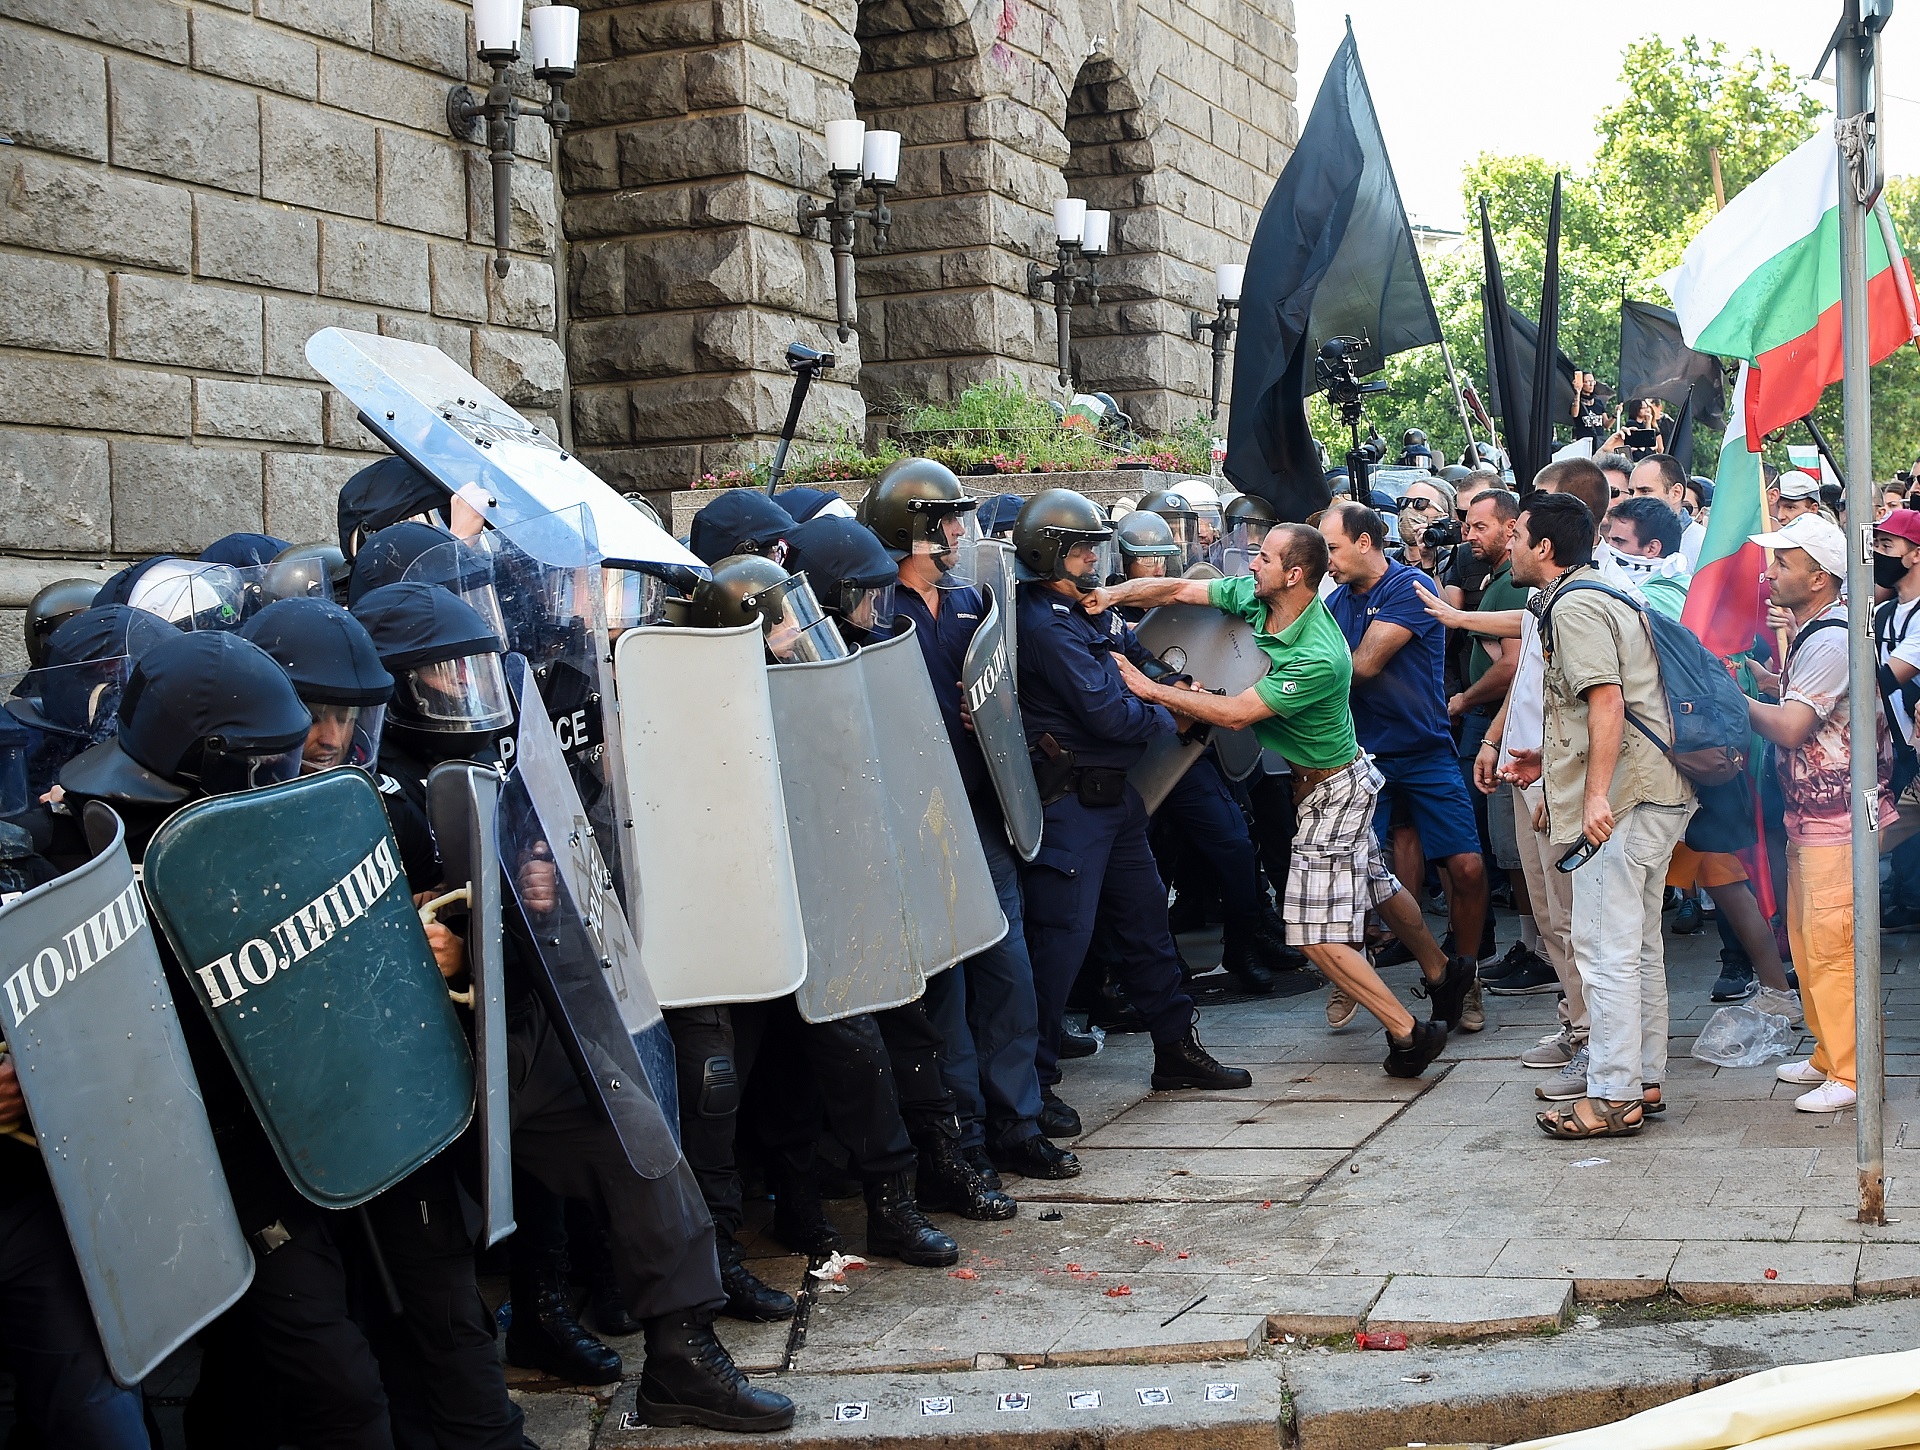 epa08640930 Gendarmerie clashes with protesters during an anti-government protest held in front of the Parliament building in Sofia, Bulgaria, 02 September 2020. Hundreds of demonstrators once again gathered in the capital's downtown area to demand the resignation of Prime Minister Boyko Borisov and his government.  EPA/Borislav Troshev